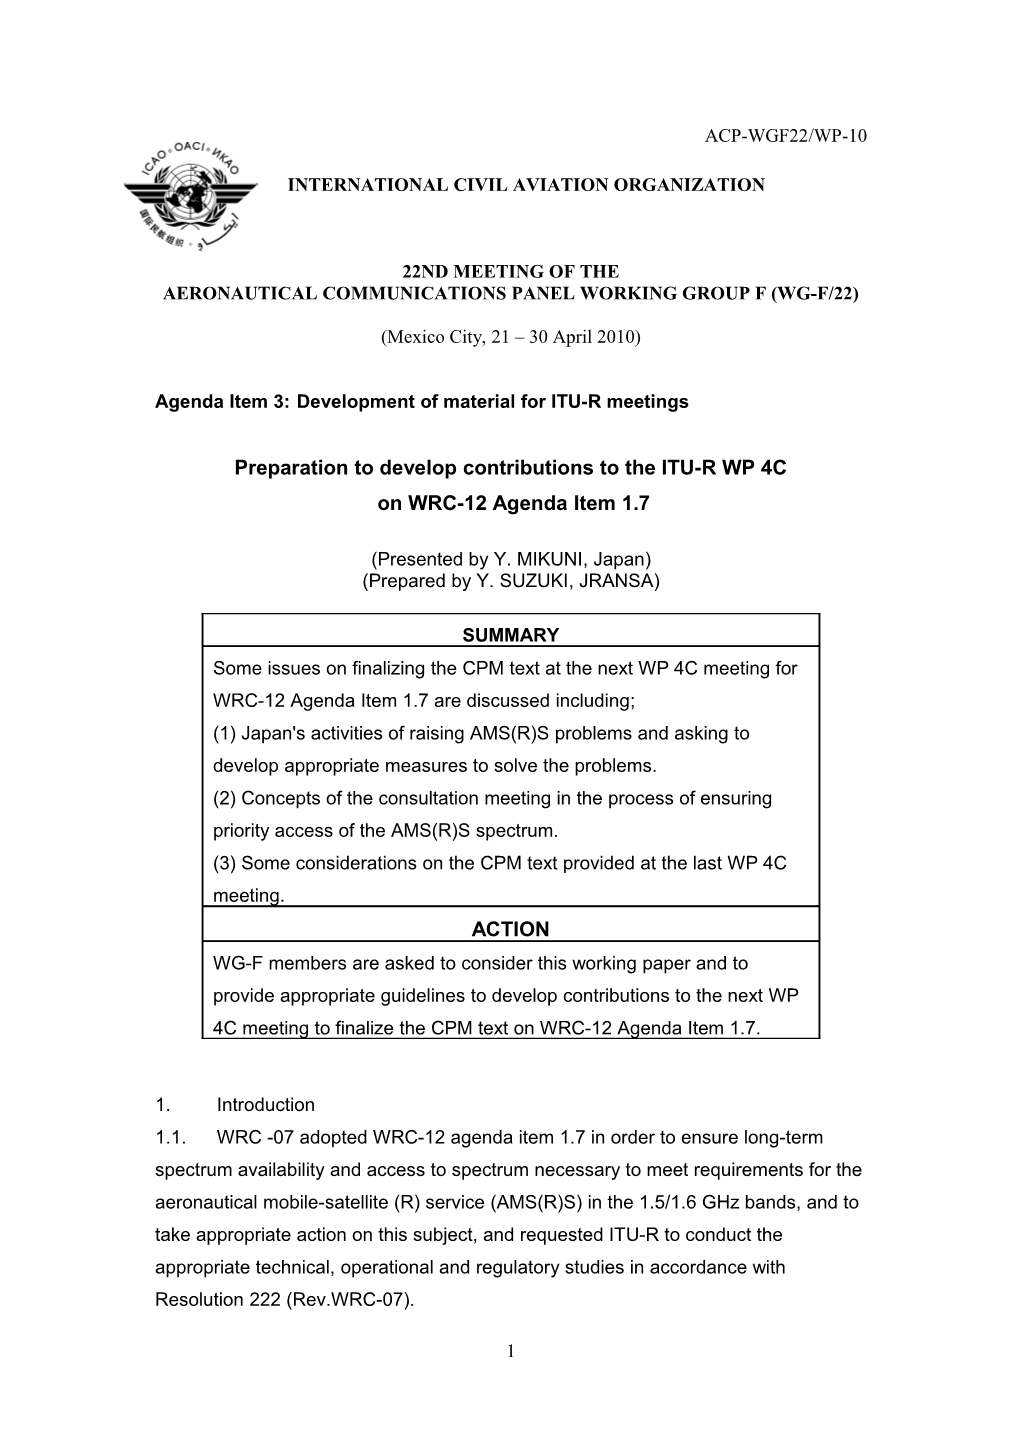 Preparation to Develop Contributions to the ITU-R WP 4C on WRC-12 Agenda Item 1.7